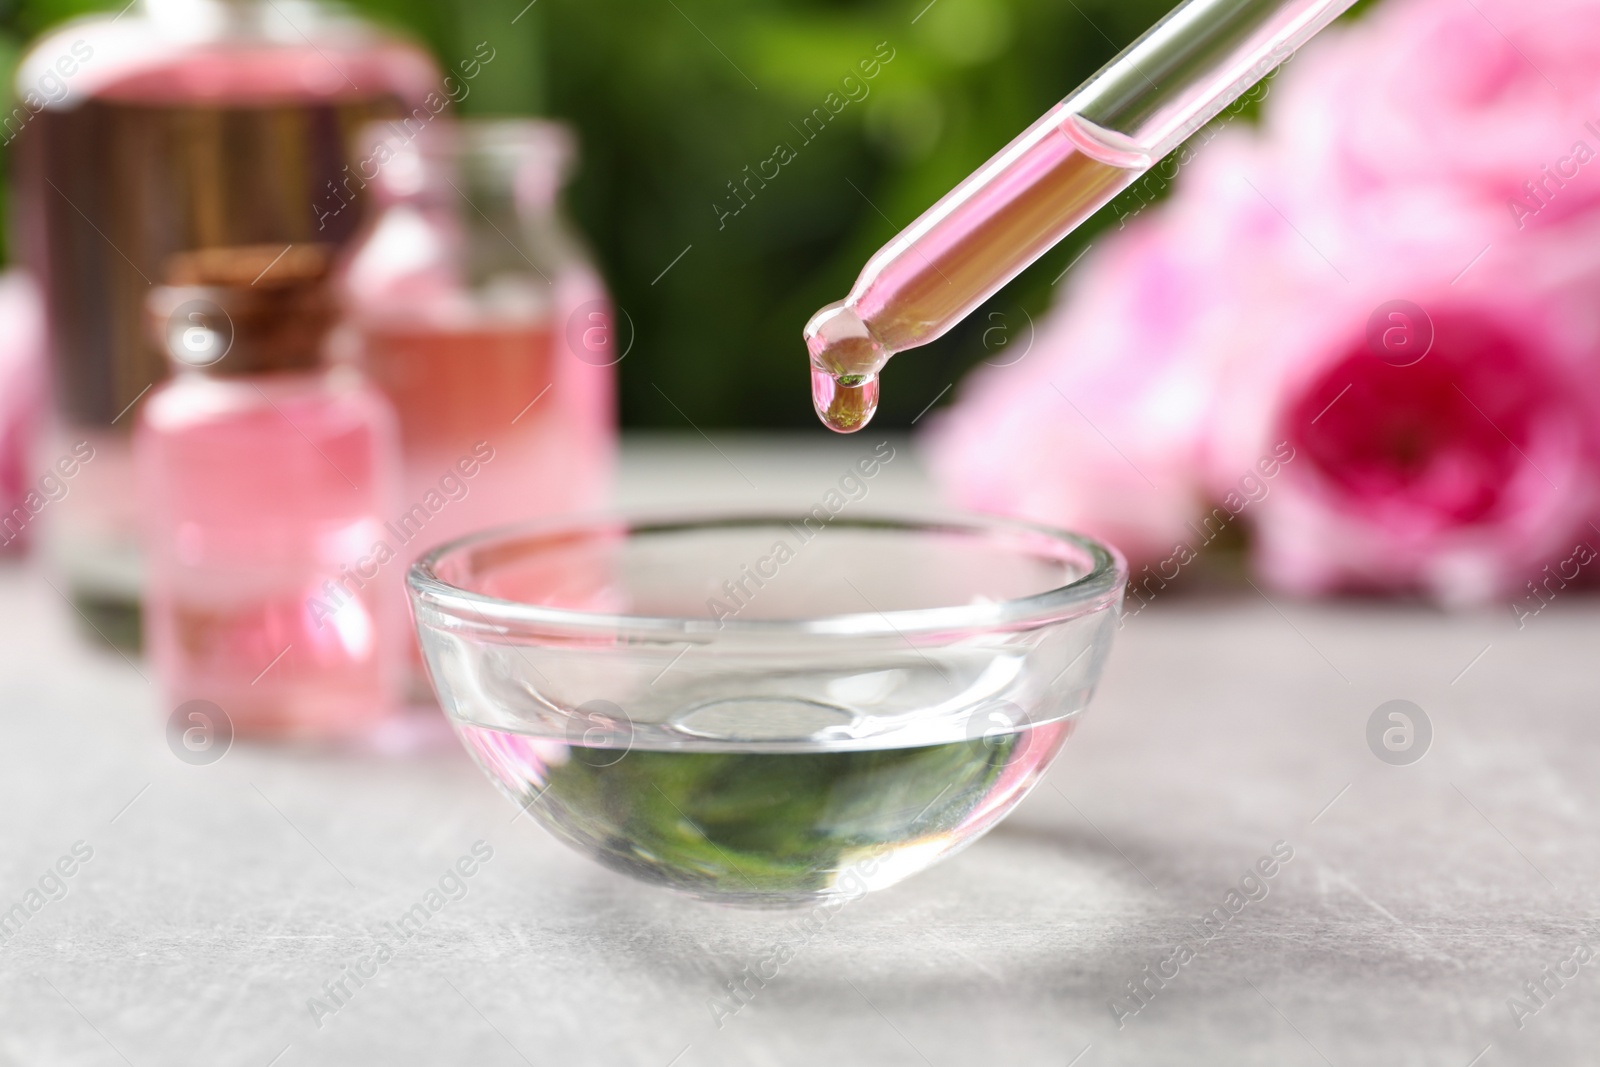 Photo of Dripping rose essential oil into bowl on table